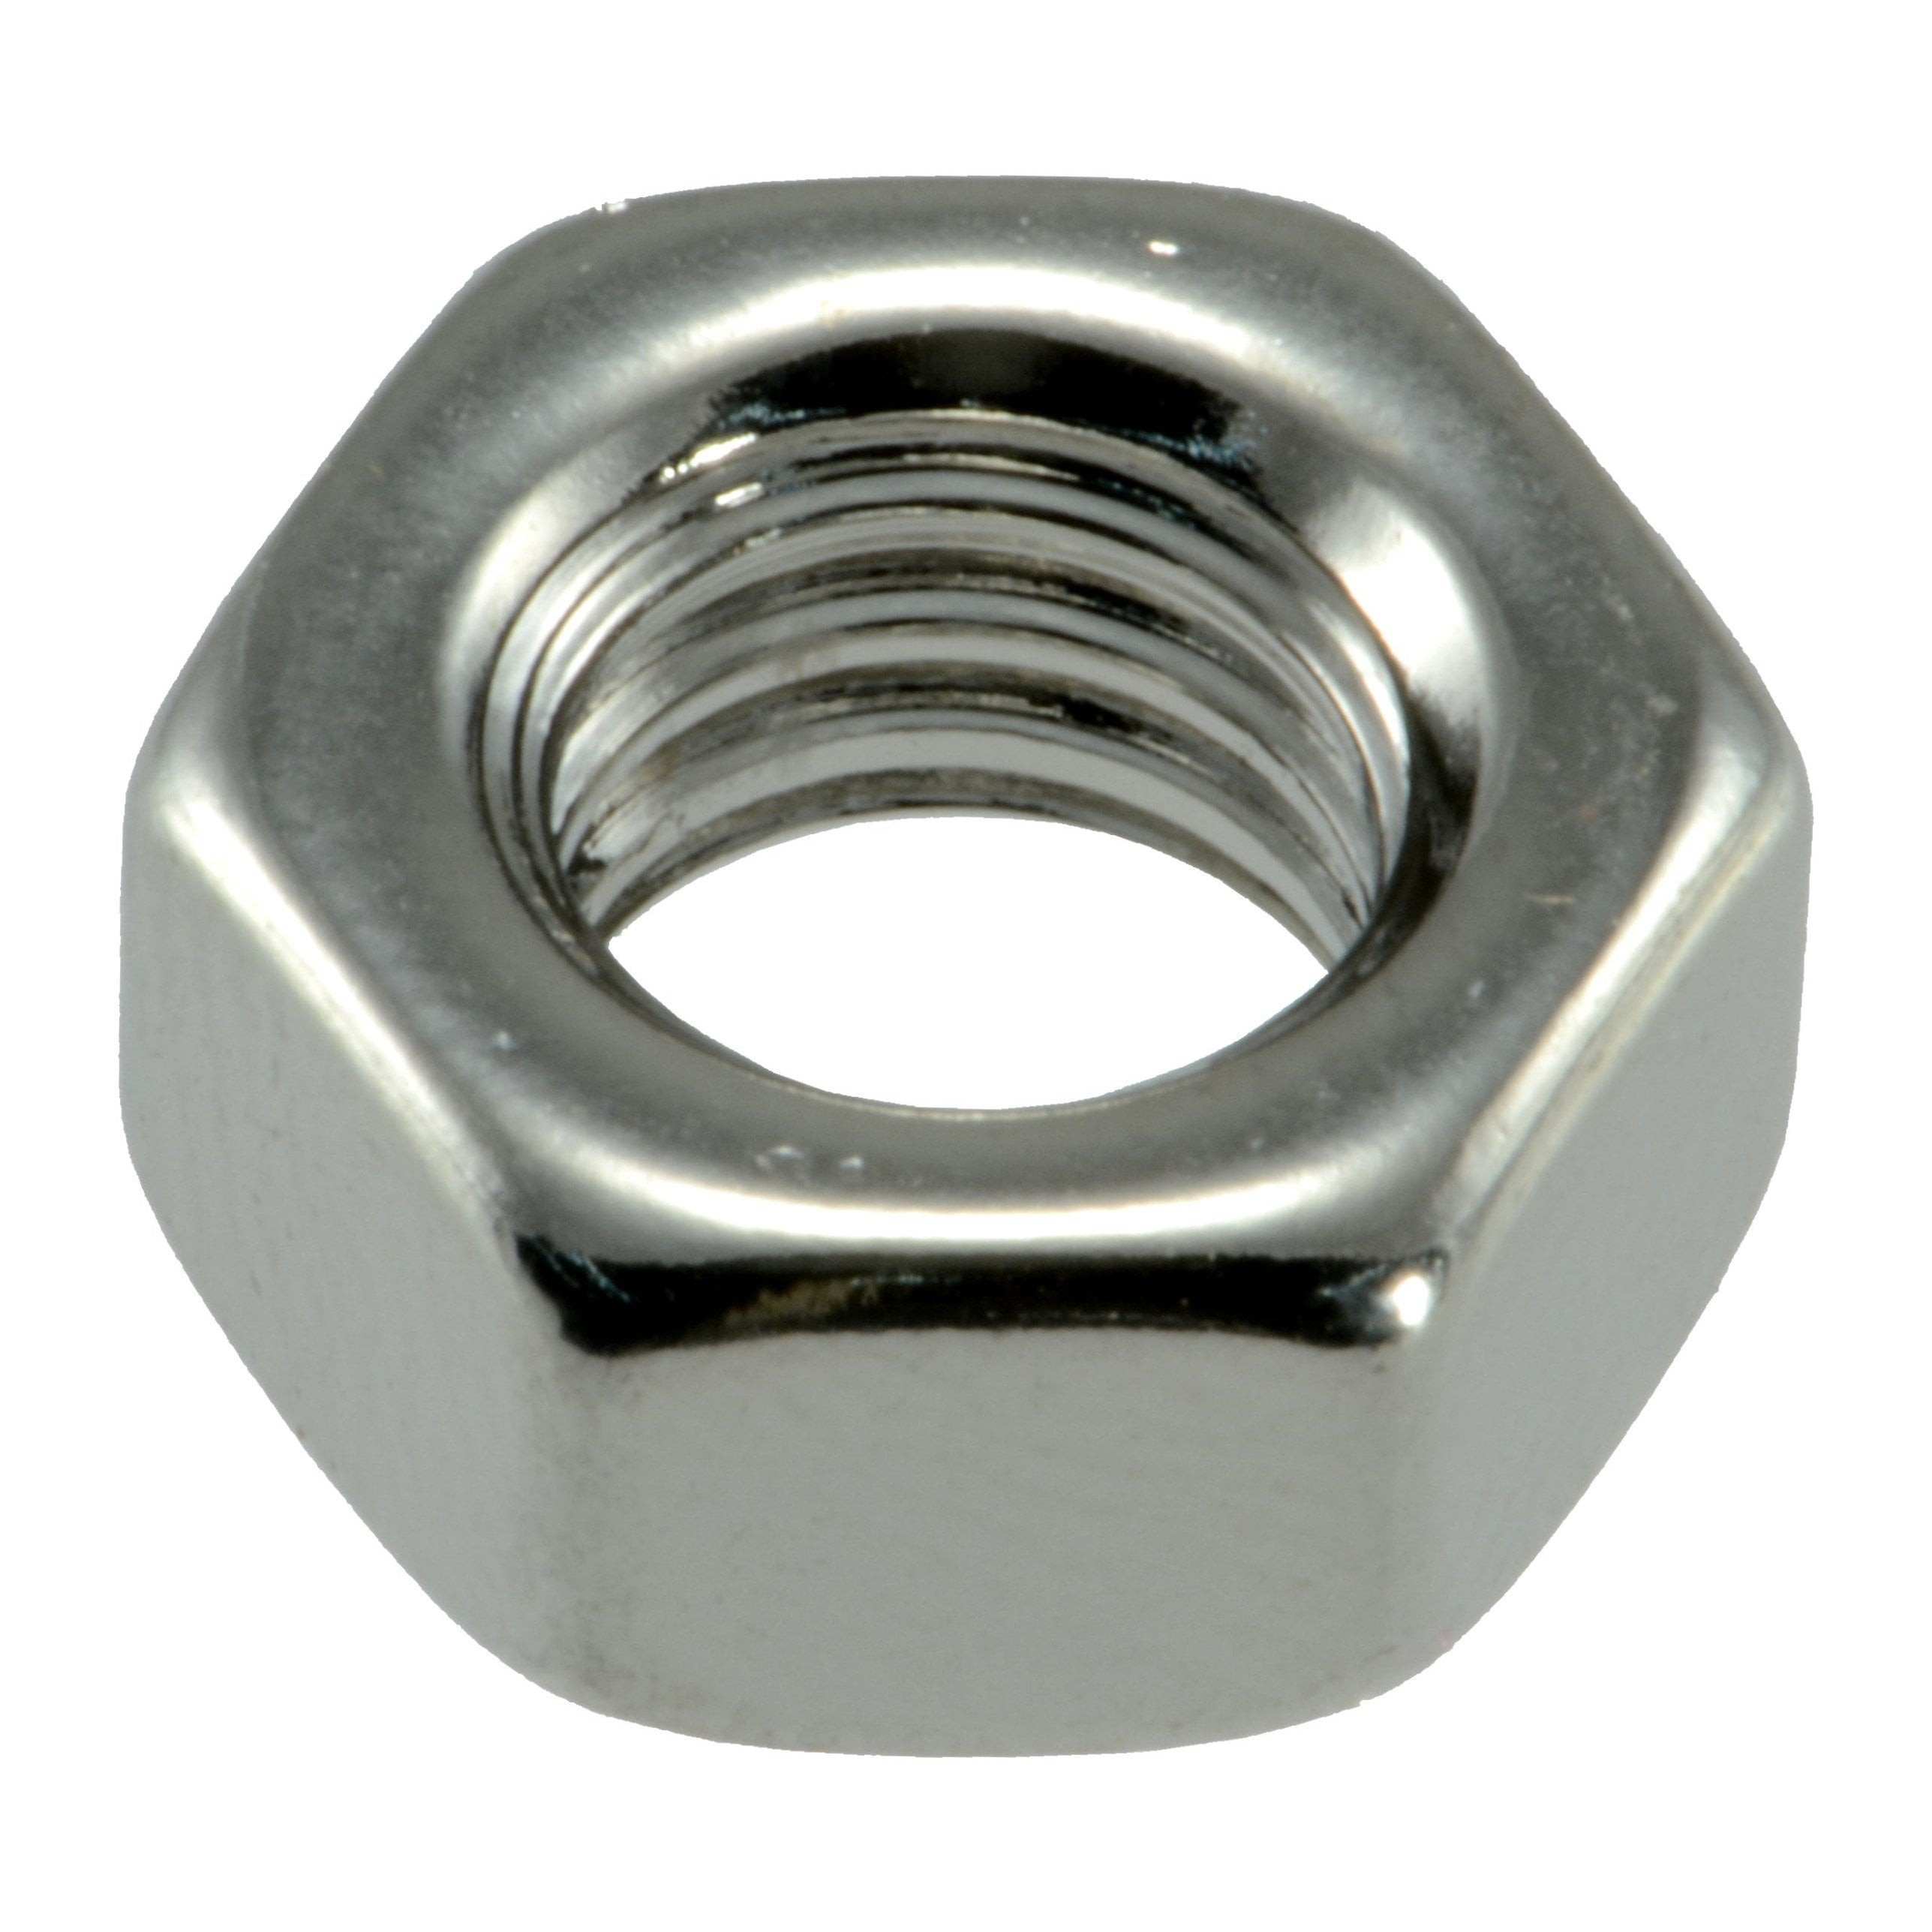 30 5/16-18 Finished Hex Jam Nuts 18-8 Stainless Steel 